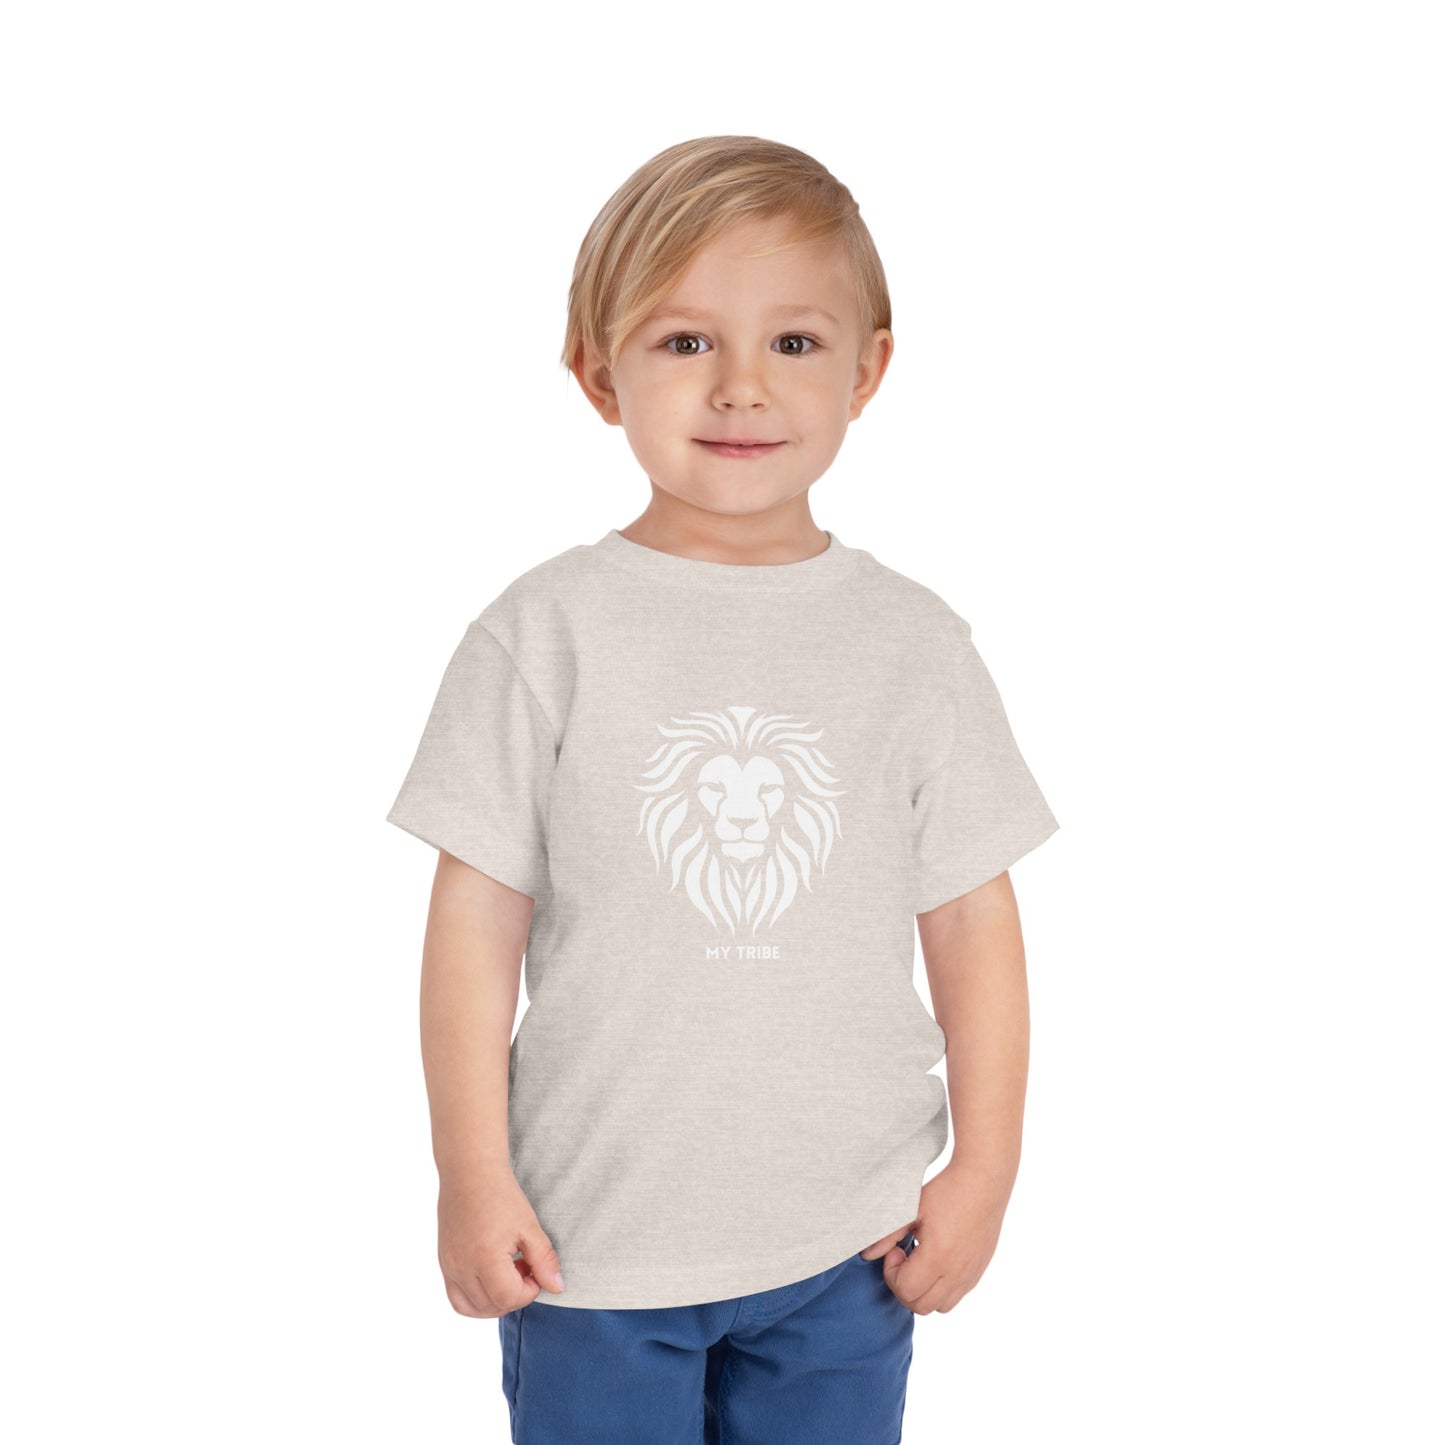 Toddler Lion My Tribe short sleeve t-shirt